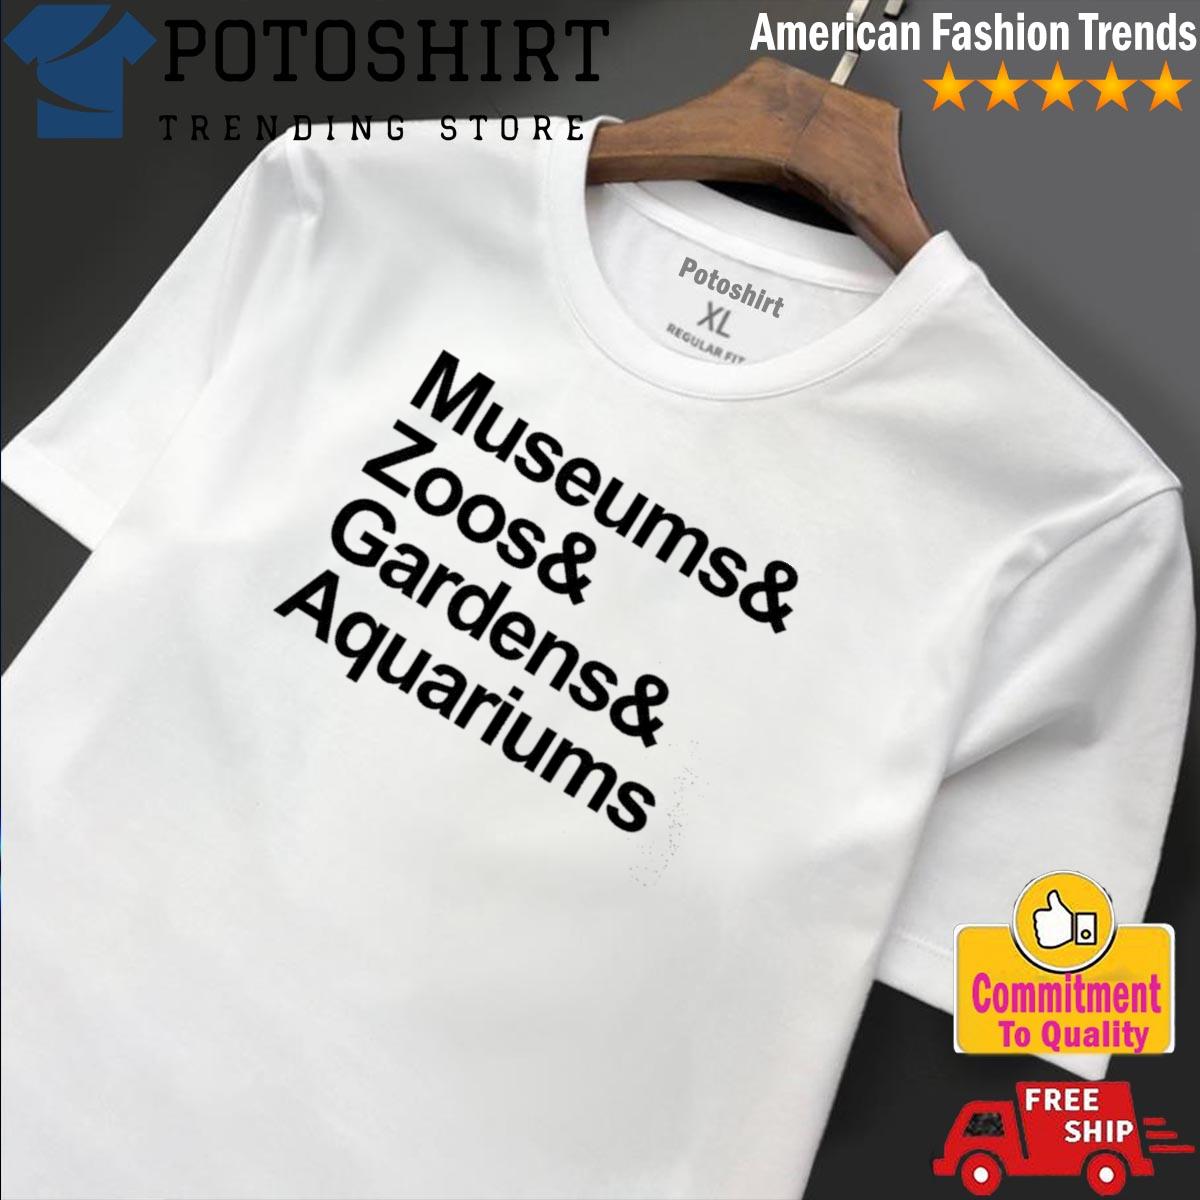 Dustin growick museums and zoos and gardens and aquariums shirt